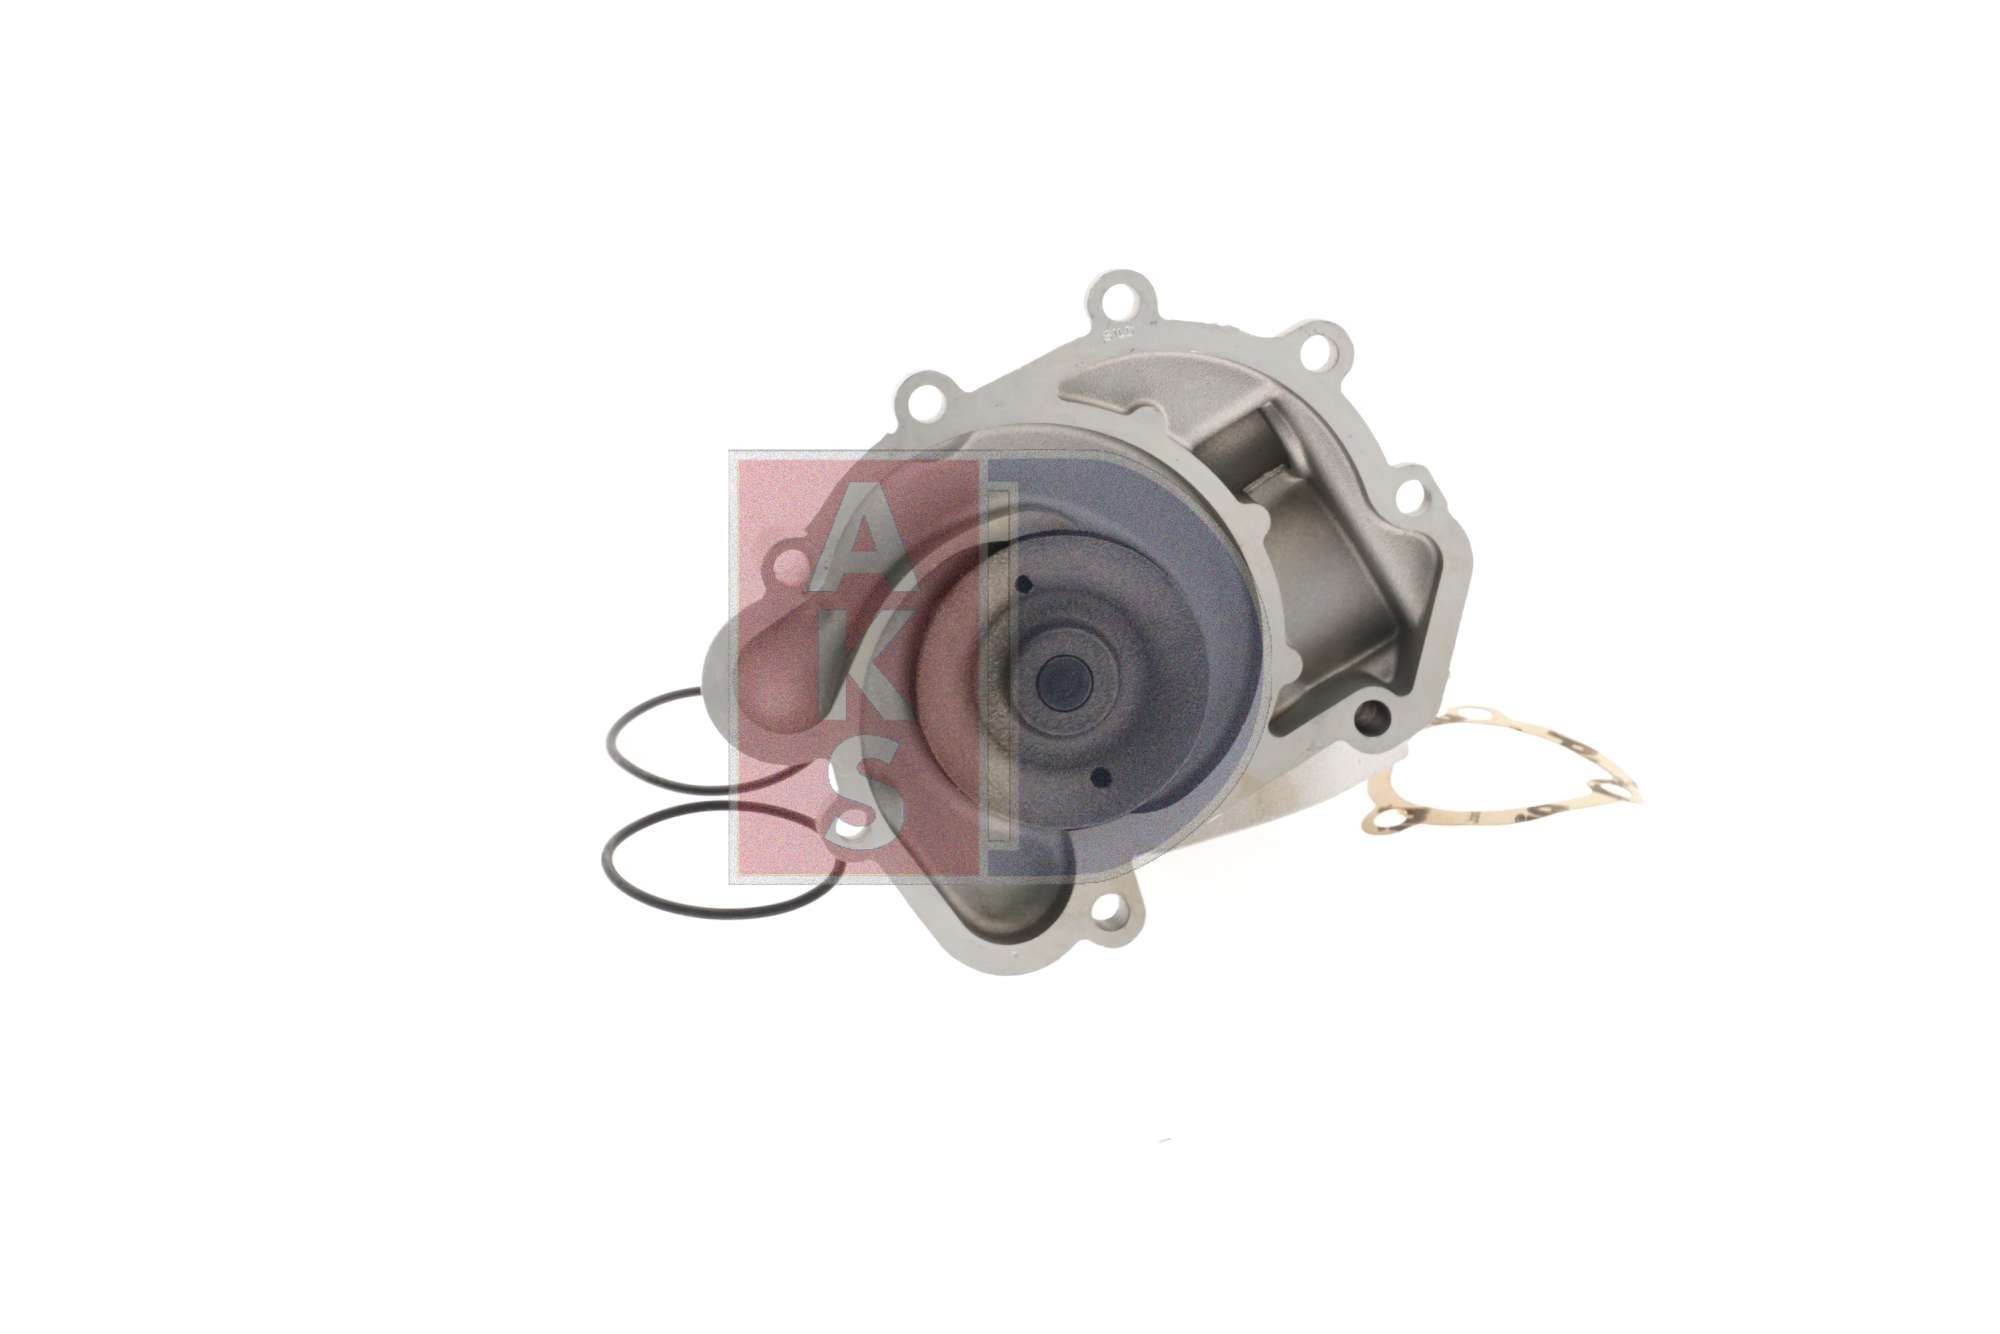 AKS DASIS Water pump for engine 570395N suitable for MERCEDES-BENZ S-Class, G-Class, SL